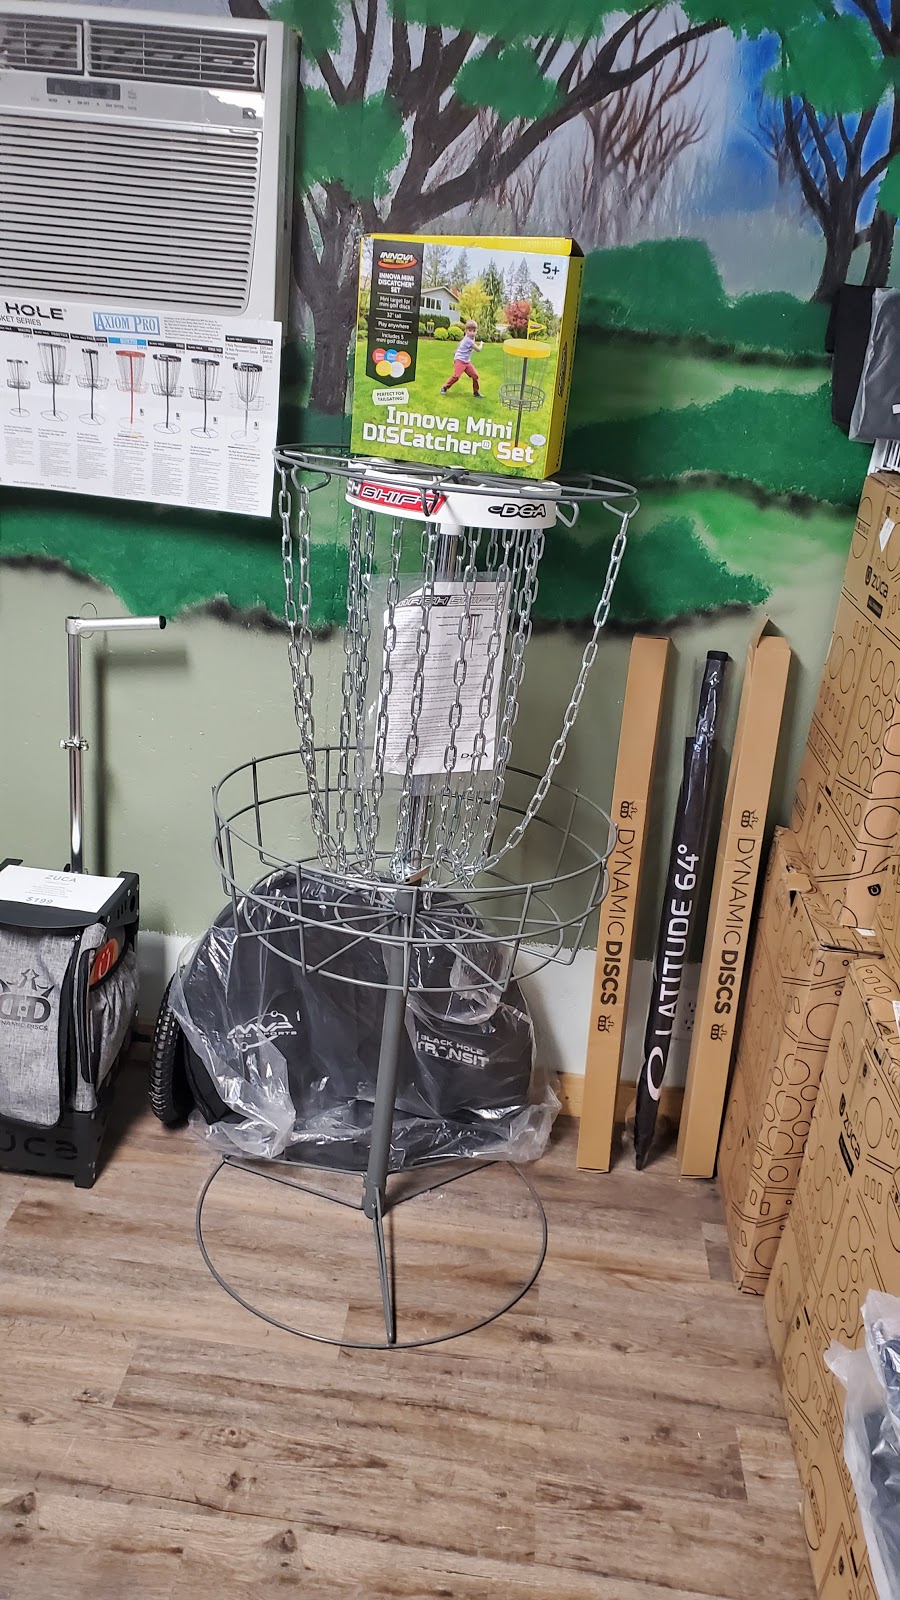 Out of Bounds Disc Golf Pro Shop & Course | 549 Tolle Rd, Cibolo, TX 78108, USA | Phone: (210) 896-9283